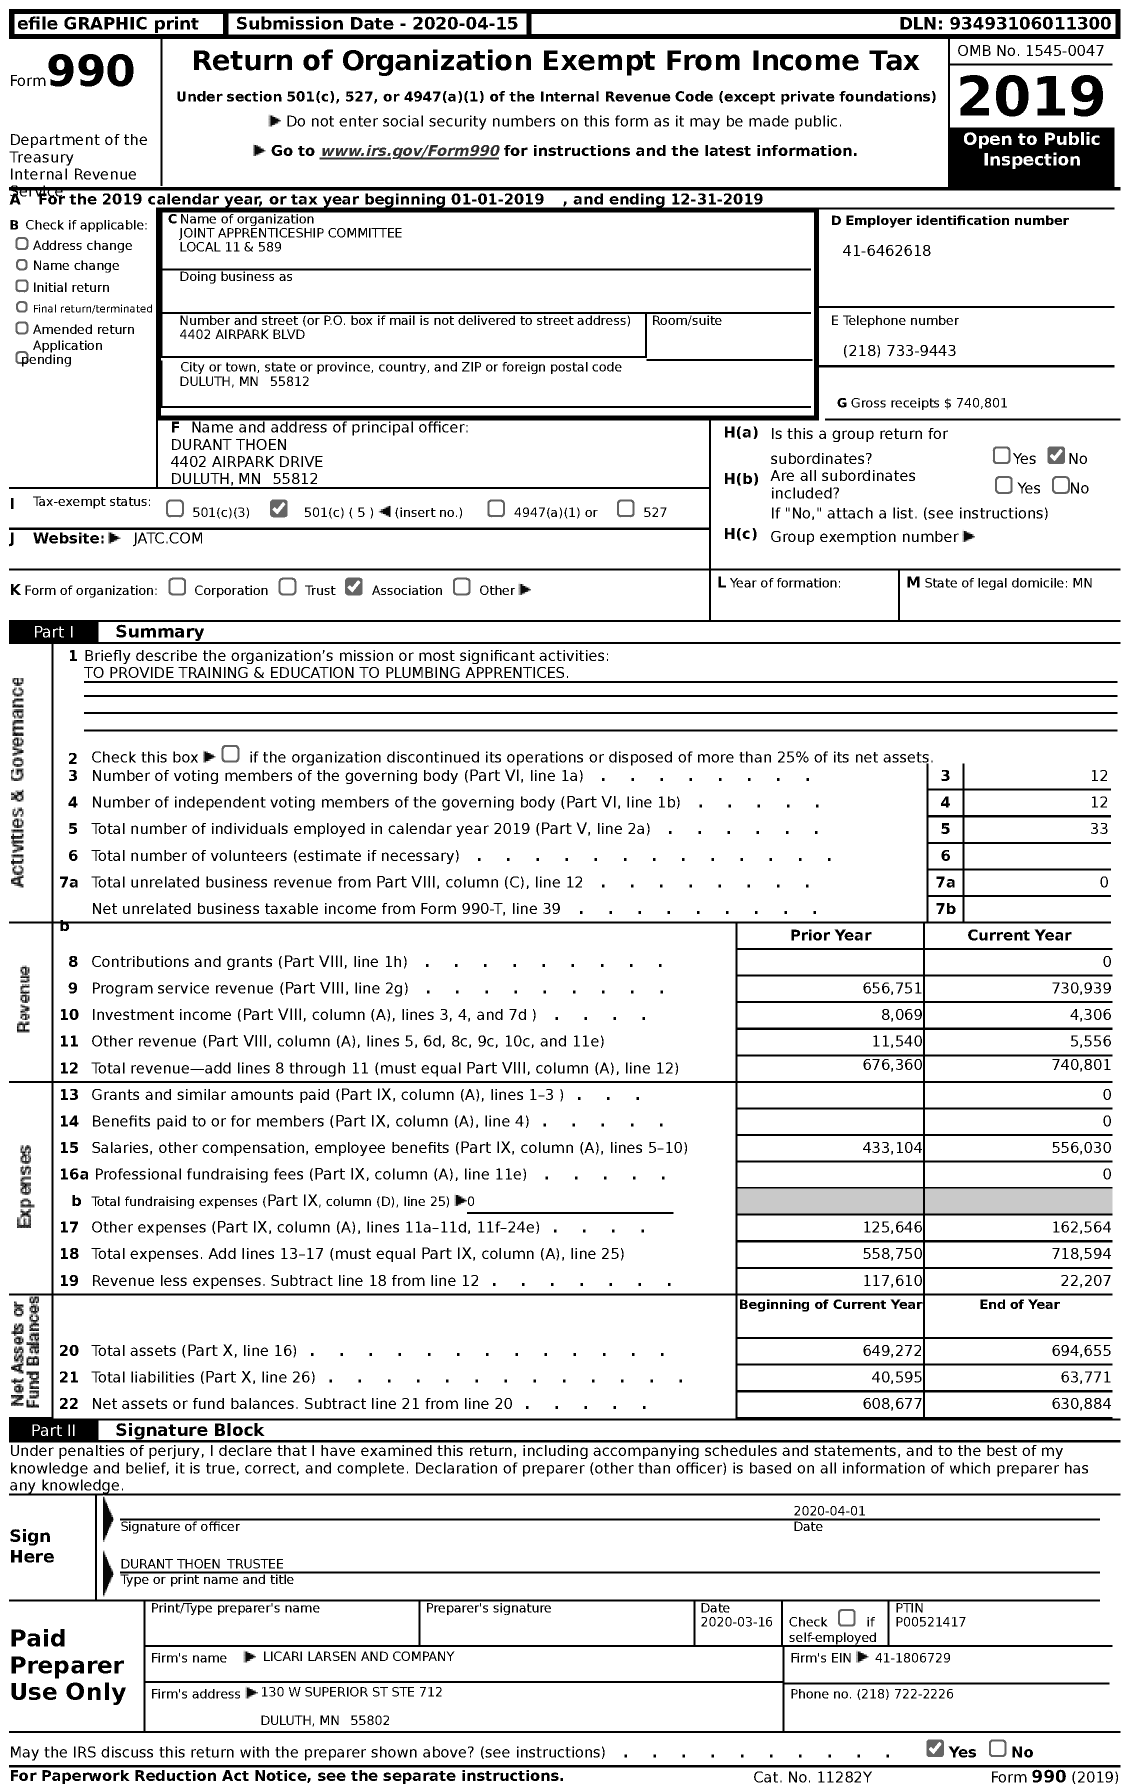 Image of first page of 2019 Form 990 for Joint Apprenticeship Committee Local 11 and 589